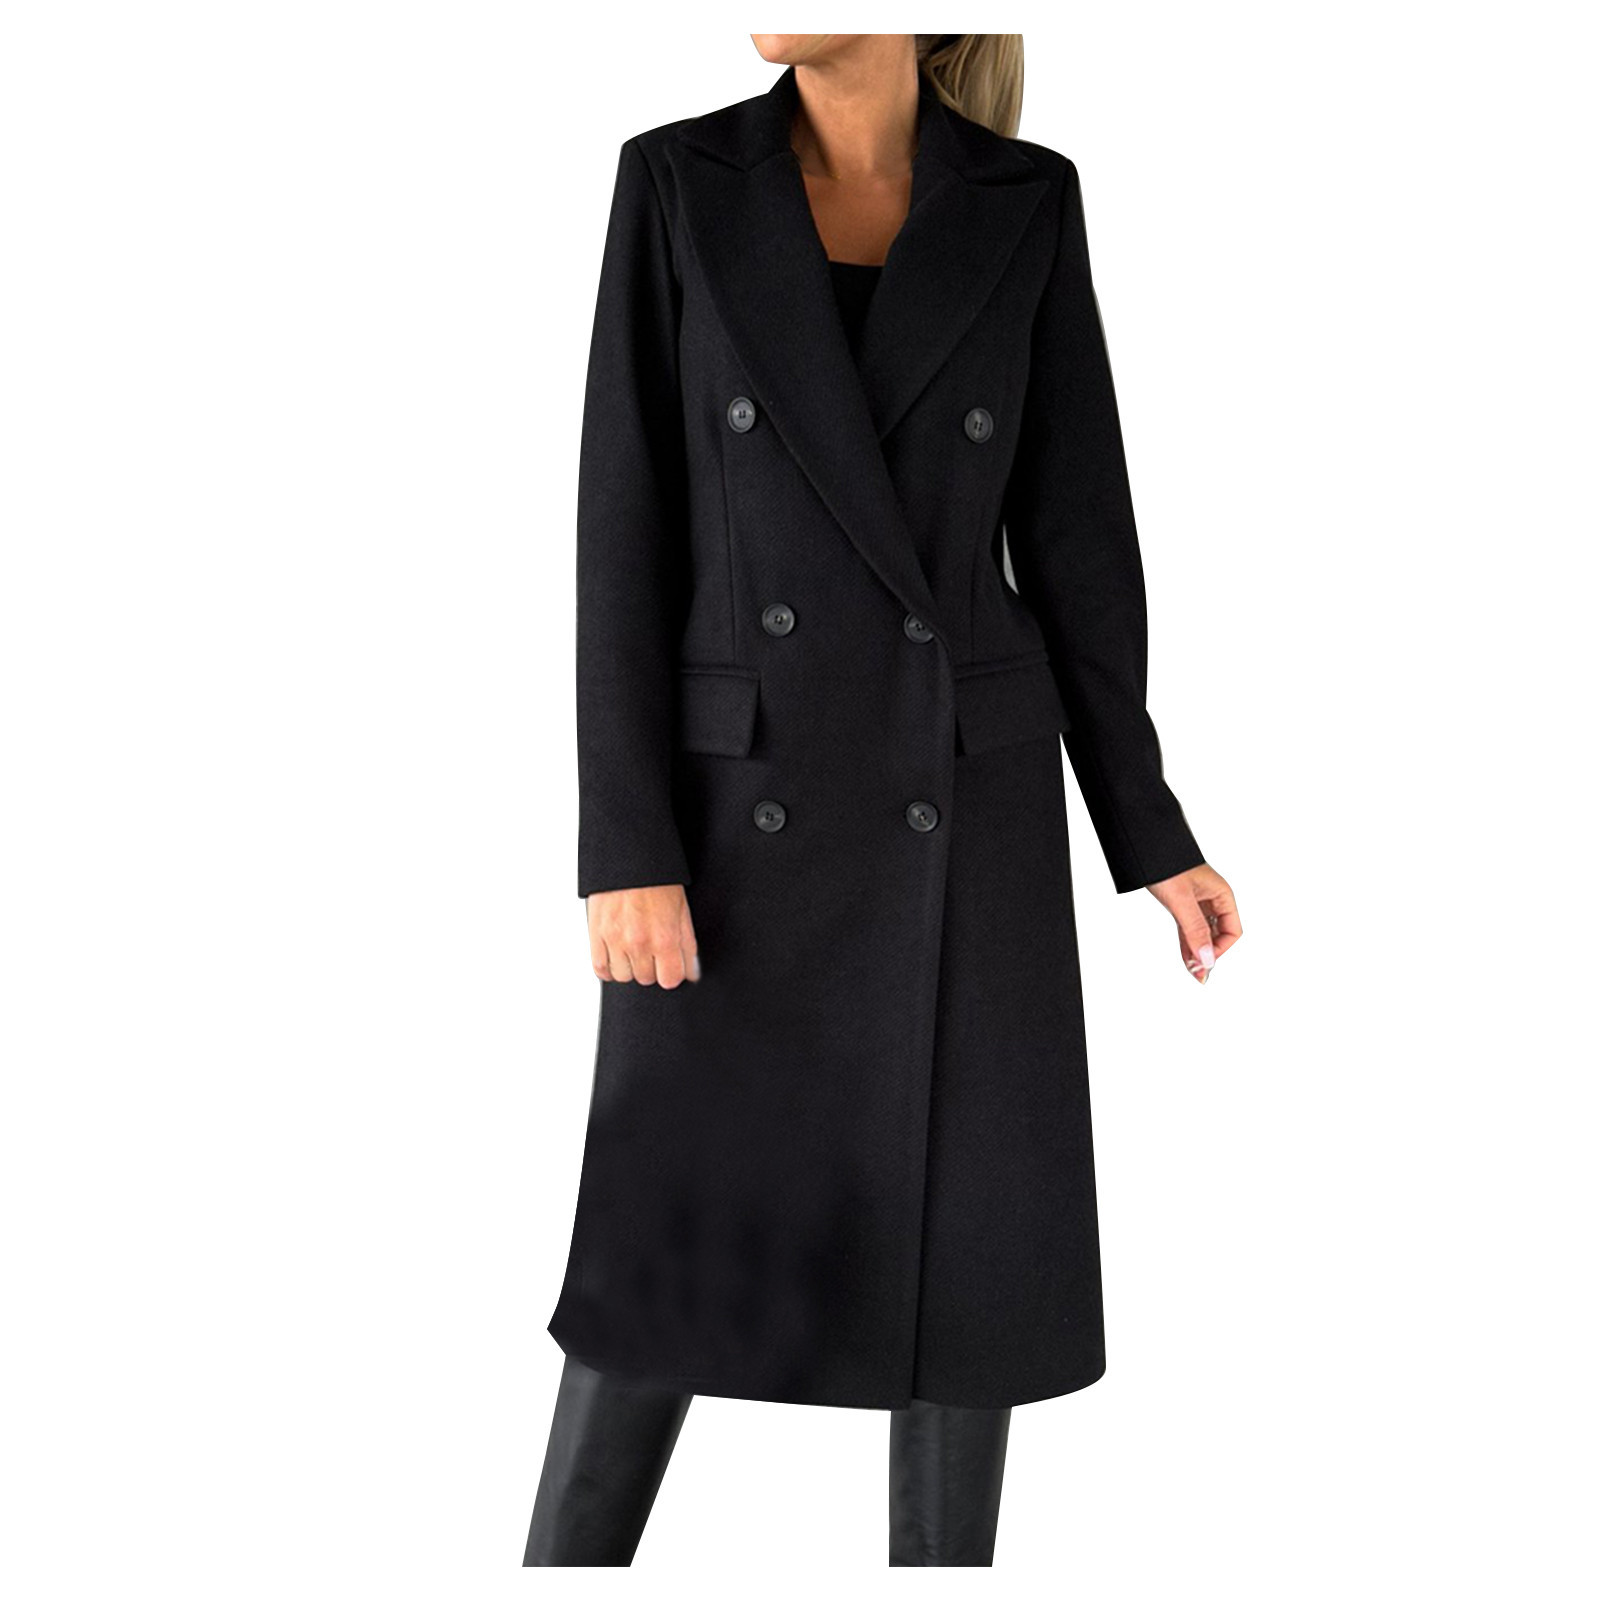 Hfyihgf Women's Double Breasted Trench Coat Classic Notch Collar Long Sleeve Peacoats Winter Warm Slim Fit Long Woolen Jackets Coat with Pockets Clearance(Black,S) - image 1 of 5